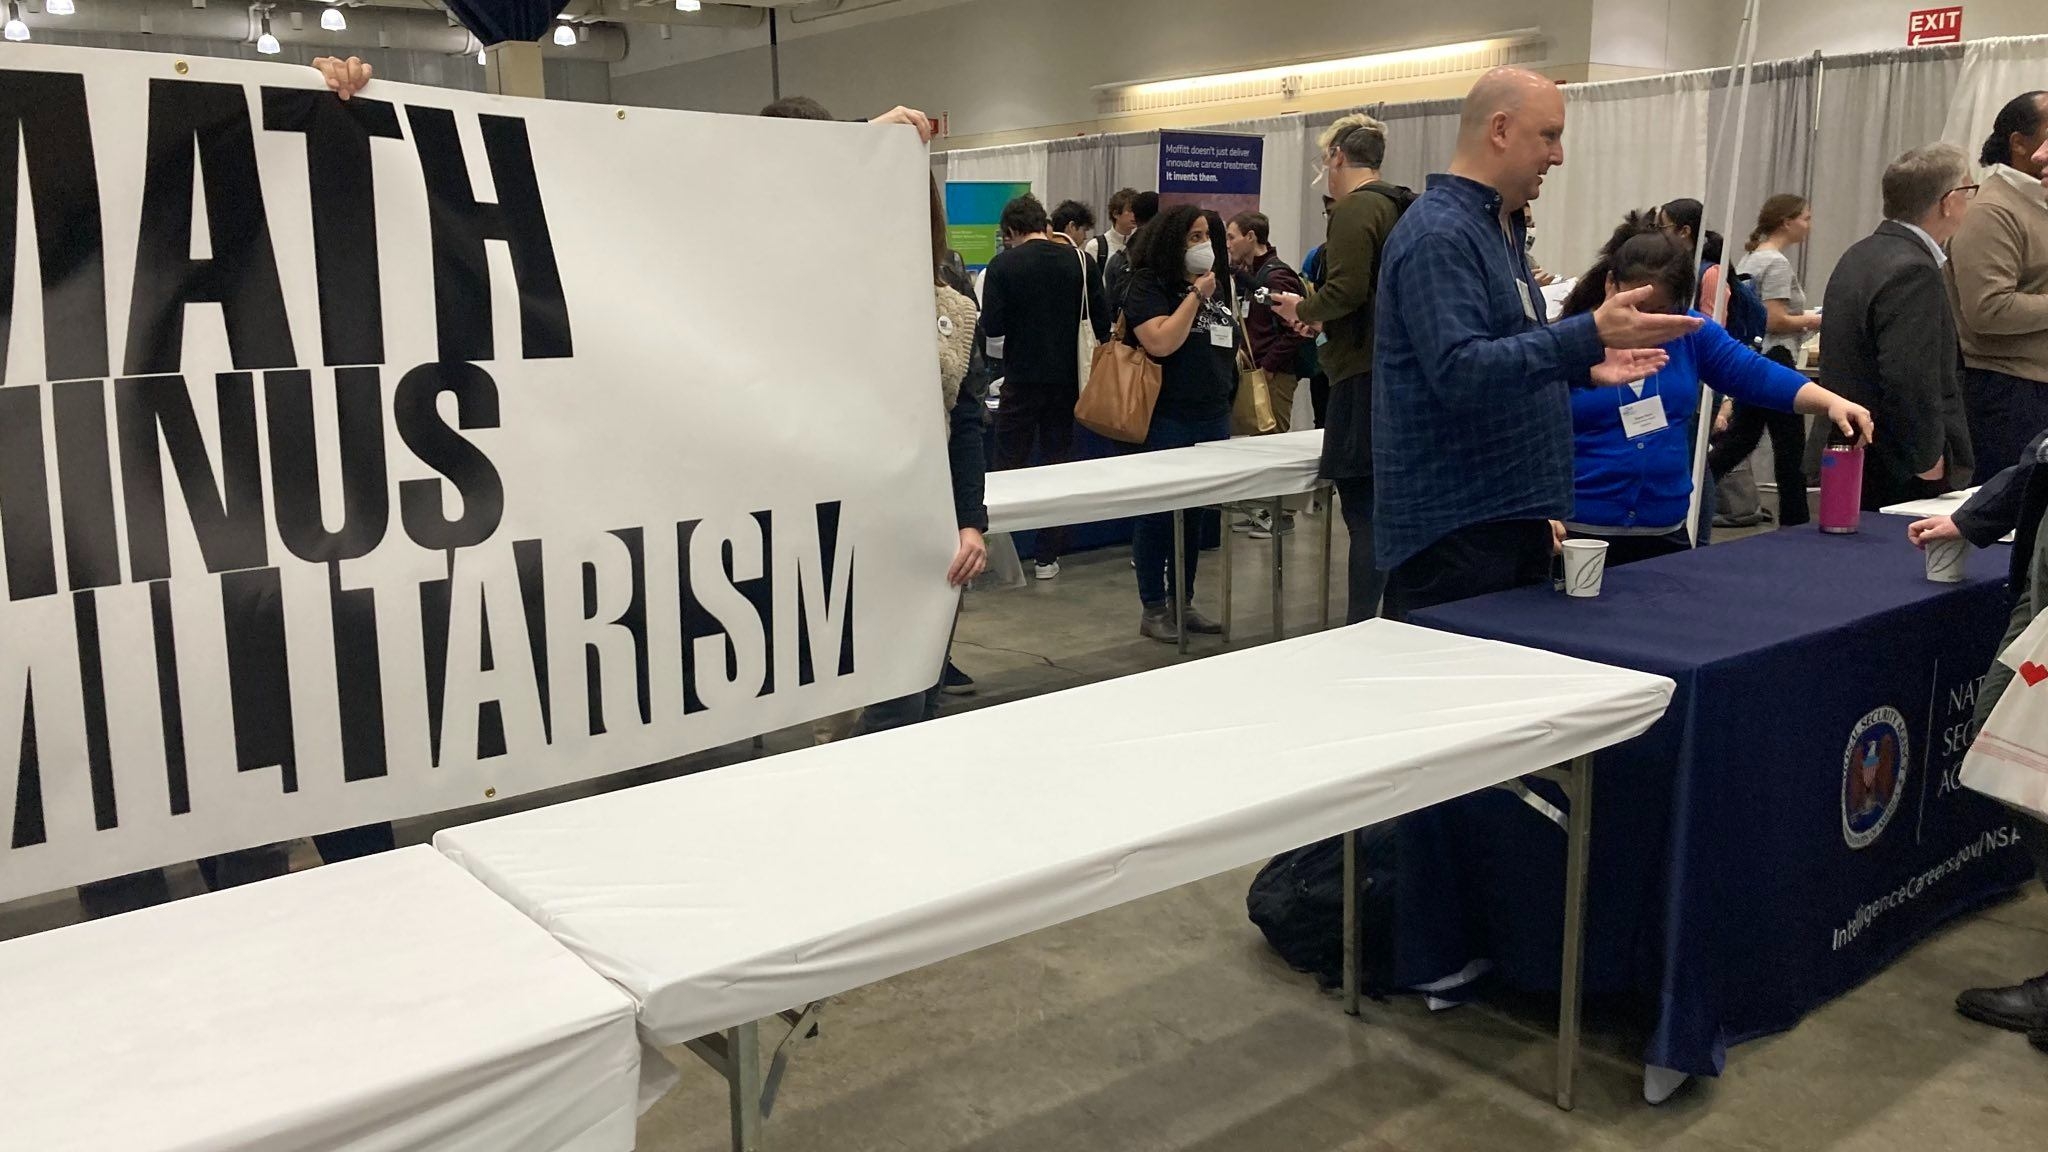 Activists hold a banner reading "MATH MINUS MILITARISM" next to a table for the NSA during a job recruitment fair at the Joint Mathematics Meeting on 5 January 2023.